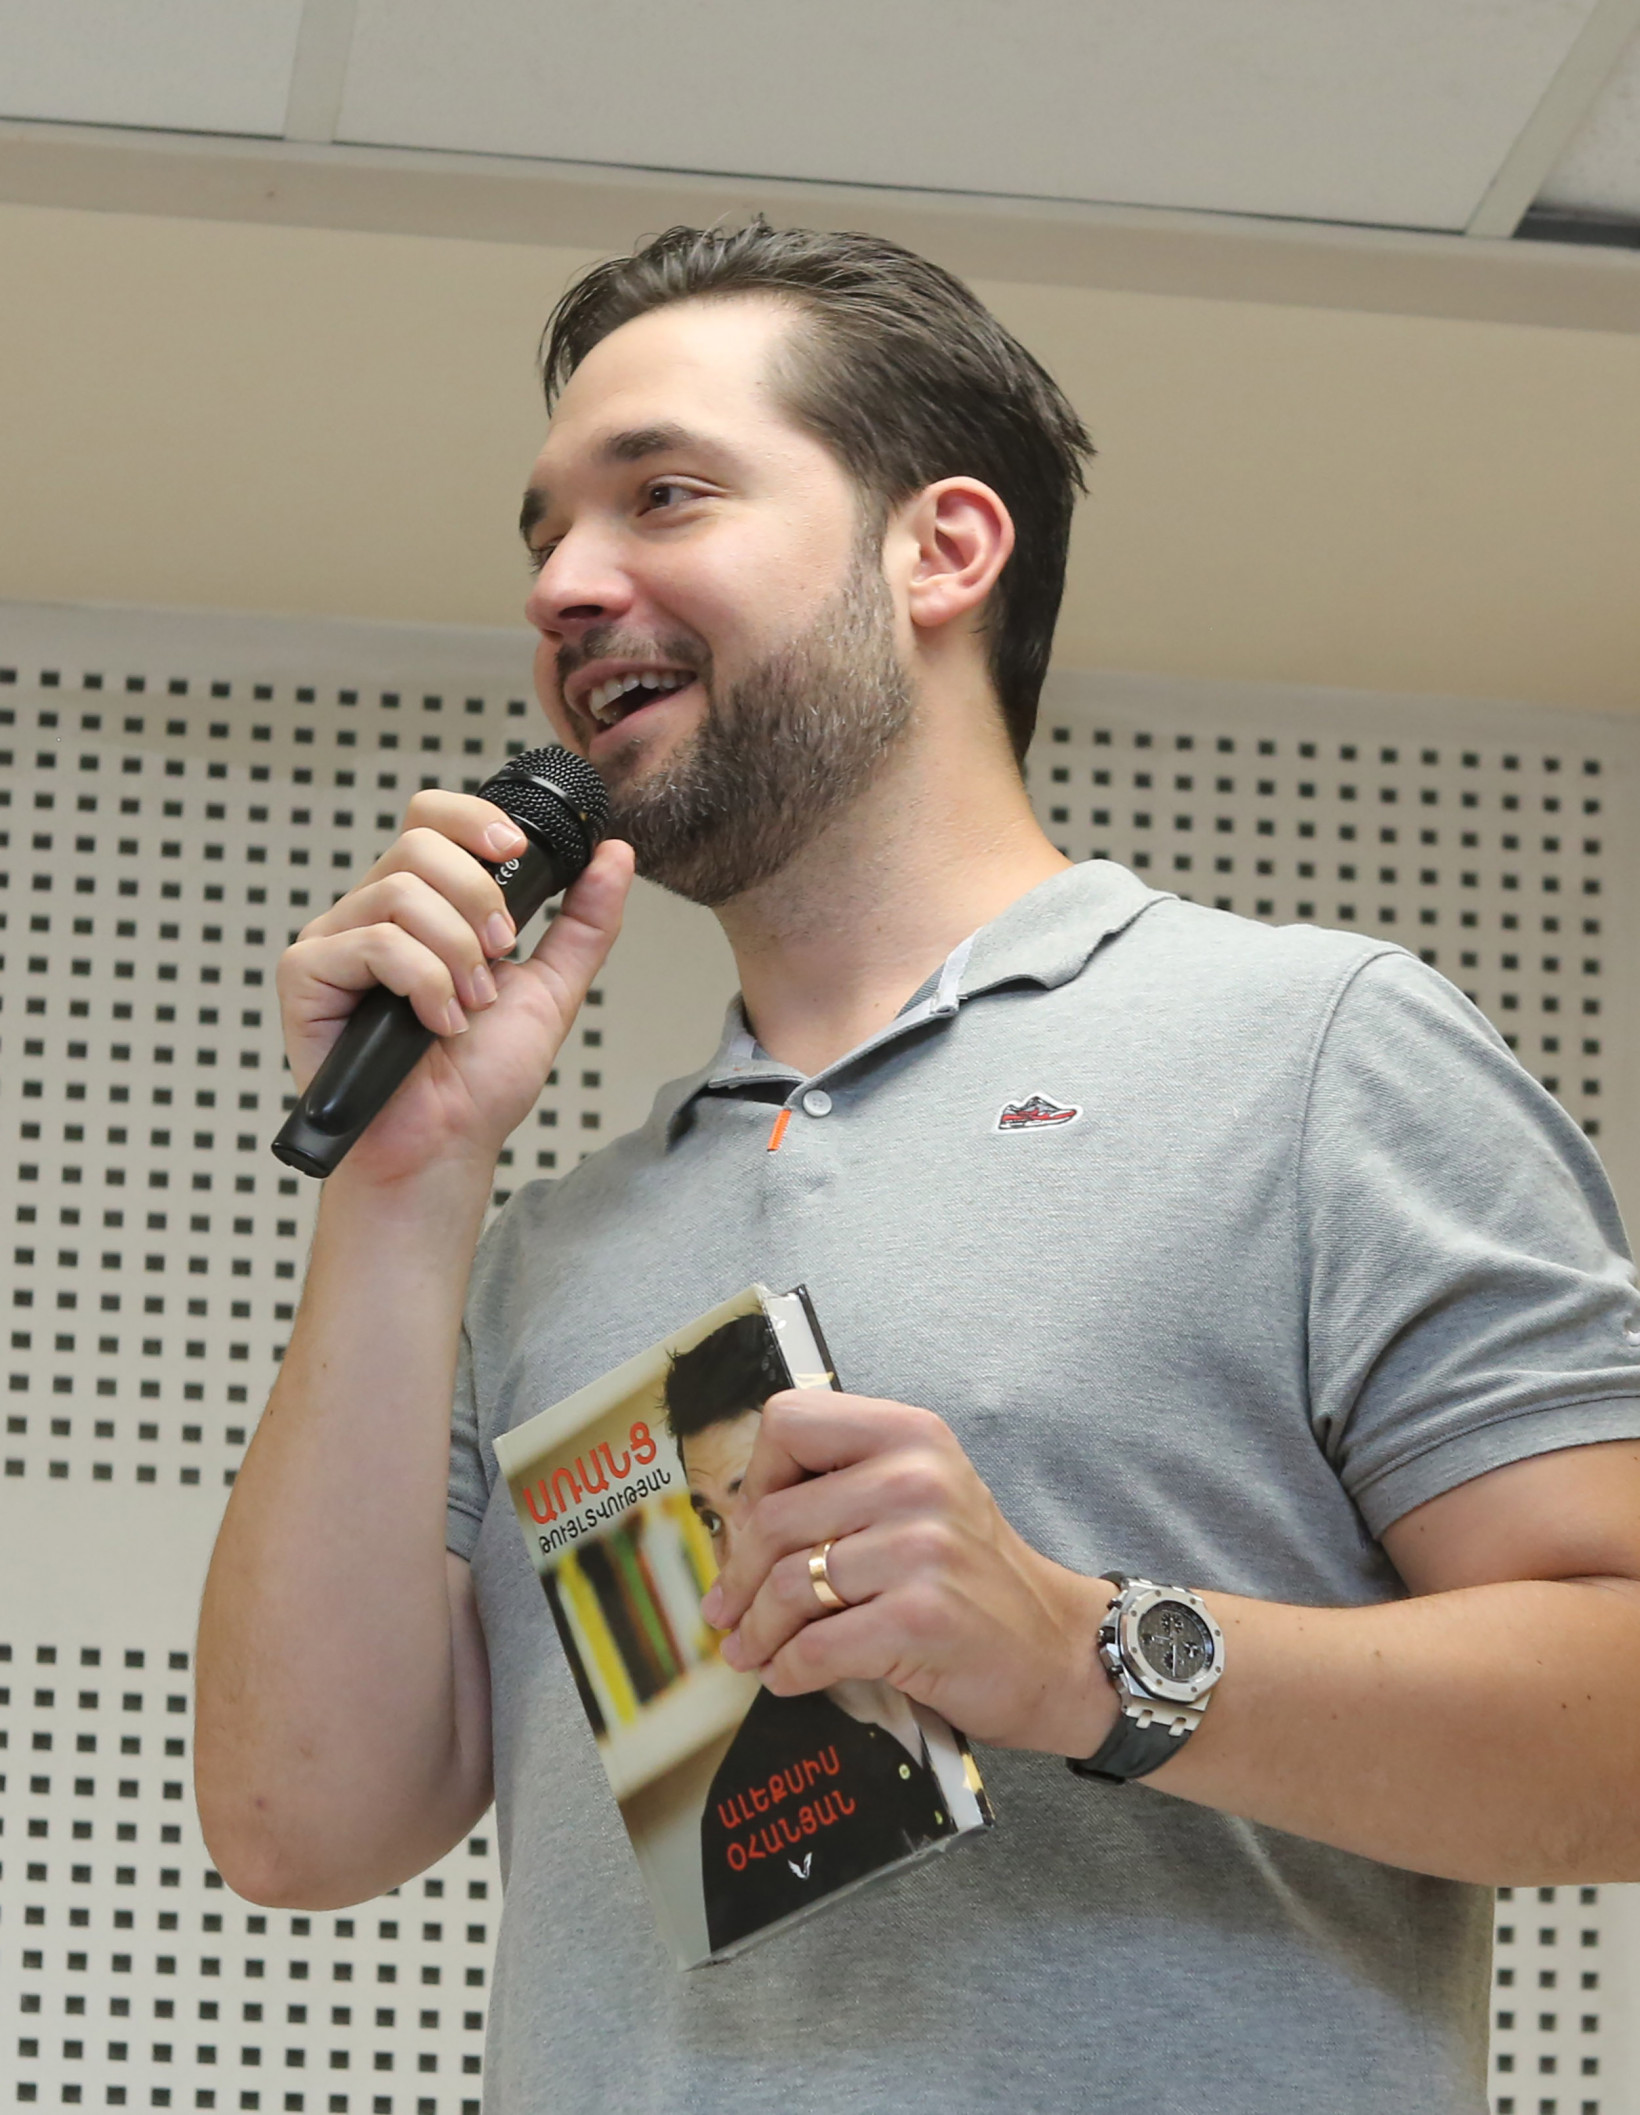 Reddit co-founder Alexis Ohanian at WCIT 2019